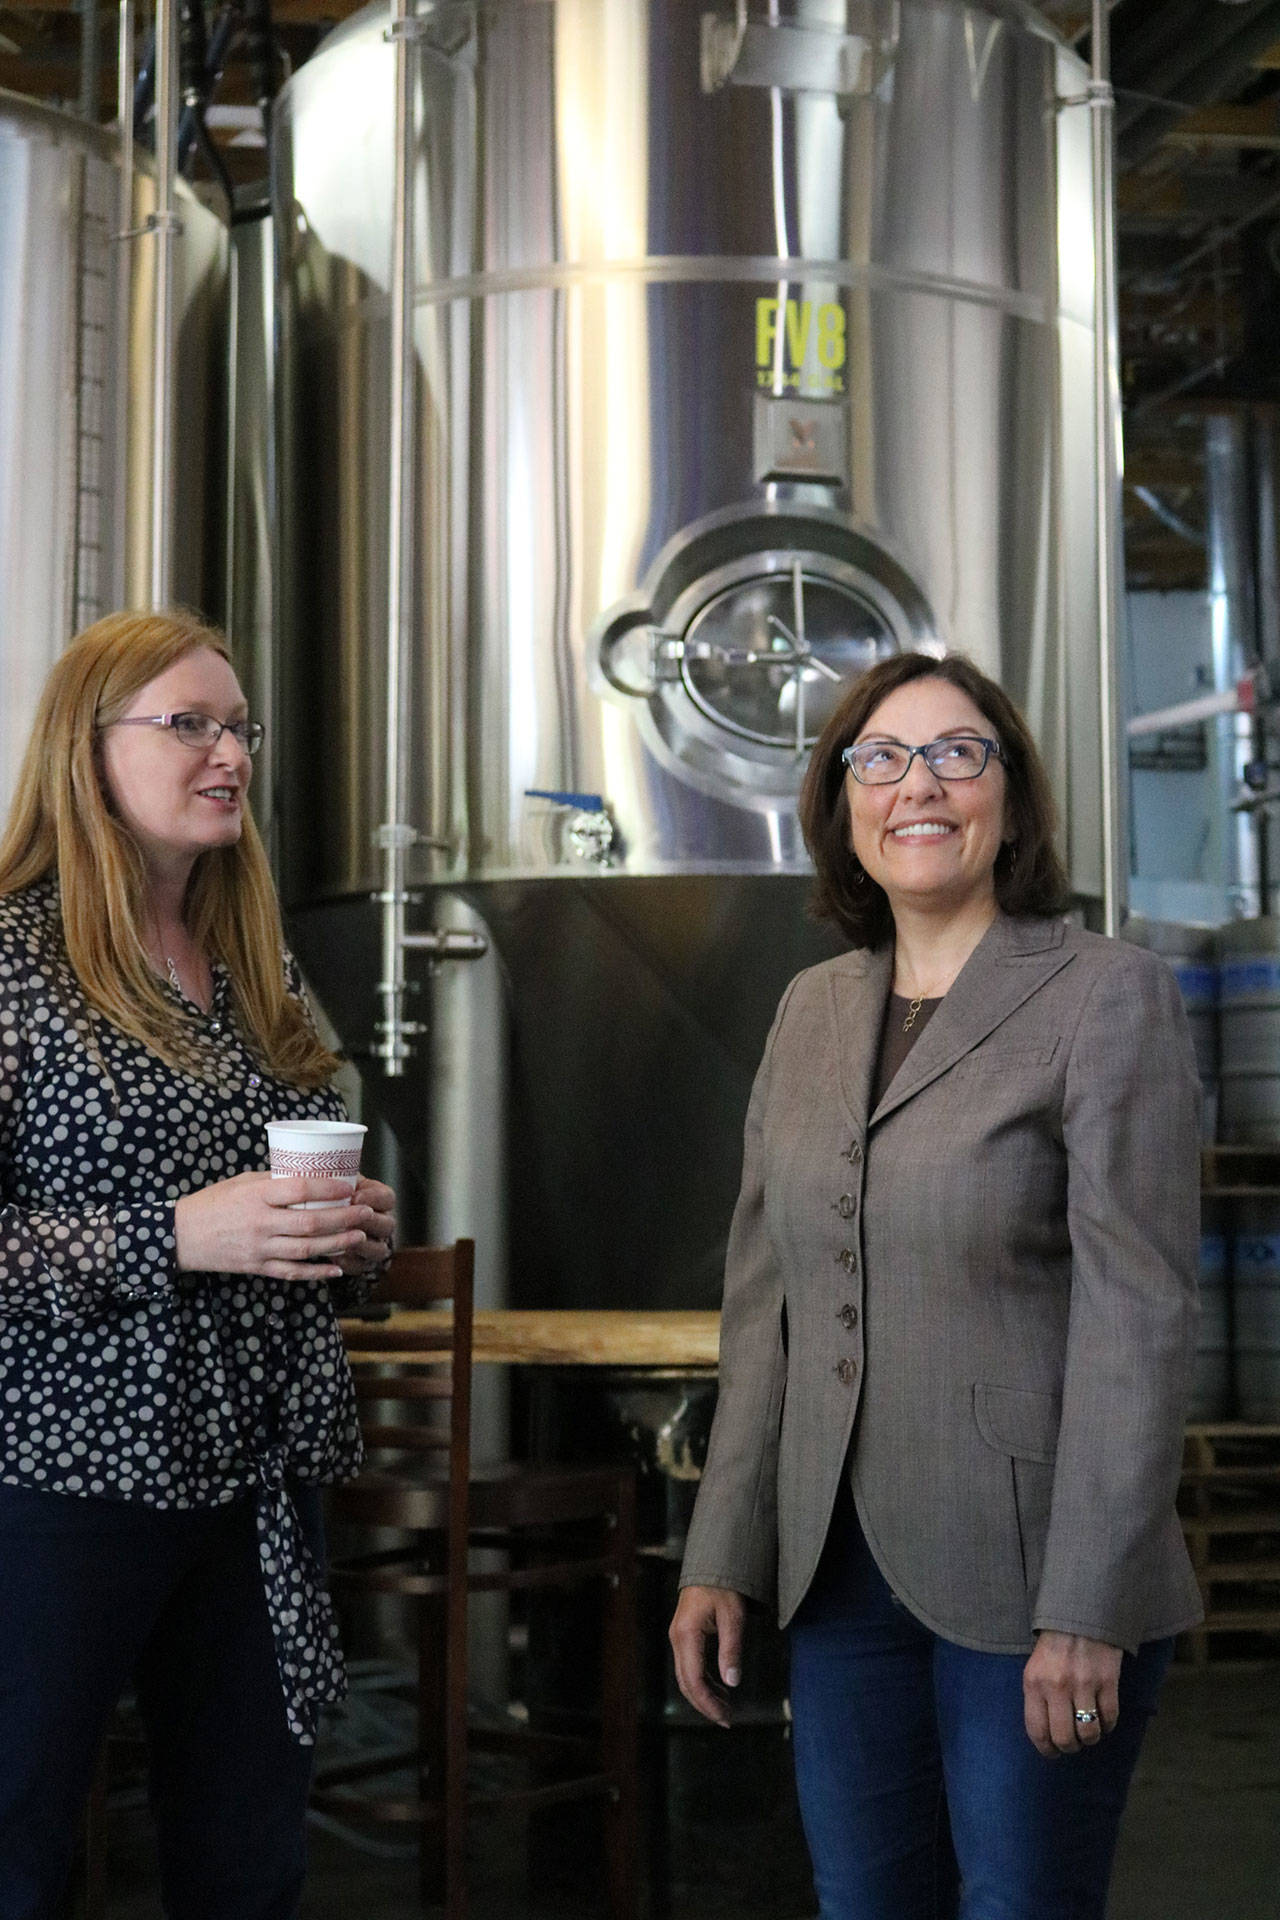 Congresswoman Suzan DelBene, right, tours the Postdoc Brewing facility in Redmond with co-owner Debbie Chambers on Tuesday. Andy Nystrom, Redmond Reporter